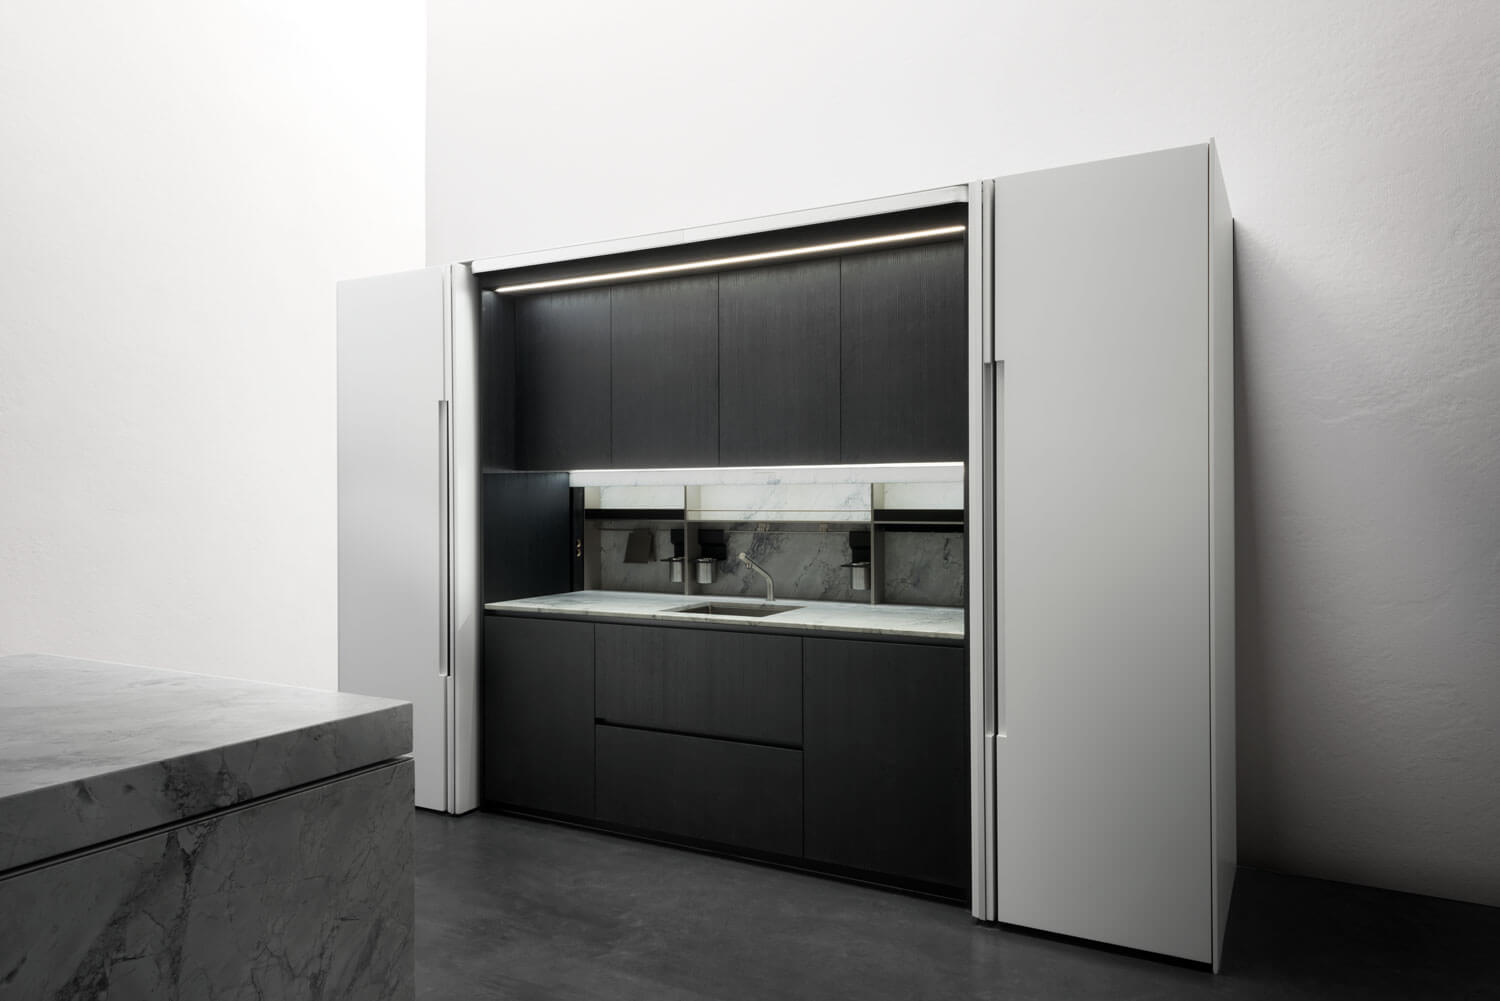 hyper kitchen, design made in Italy, hyper kitchens. Design by Canova, kitchen, architecture, interiors, luxury, cabinets, residential, millwork. In new york and italy